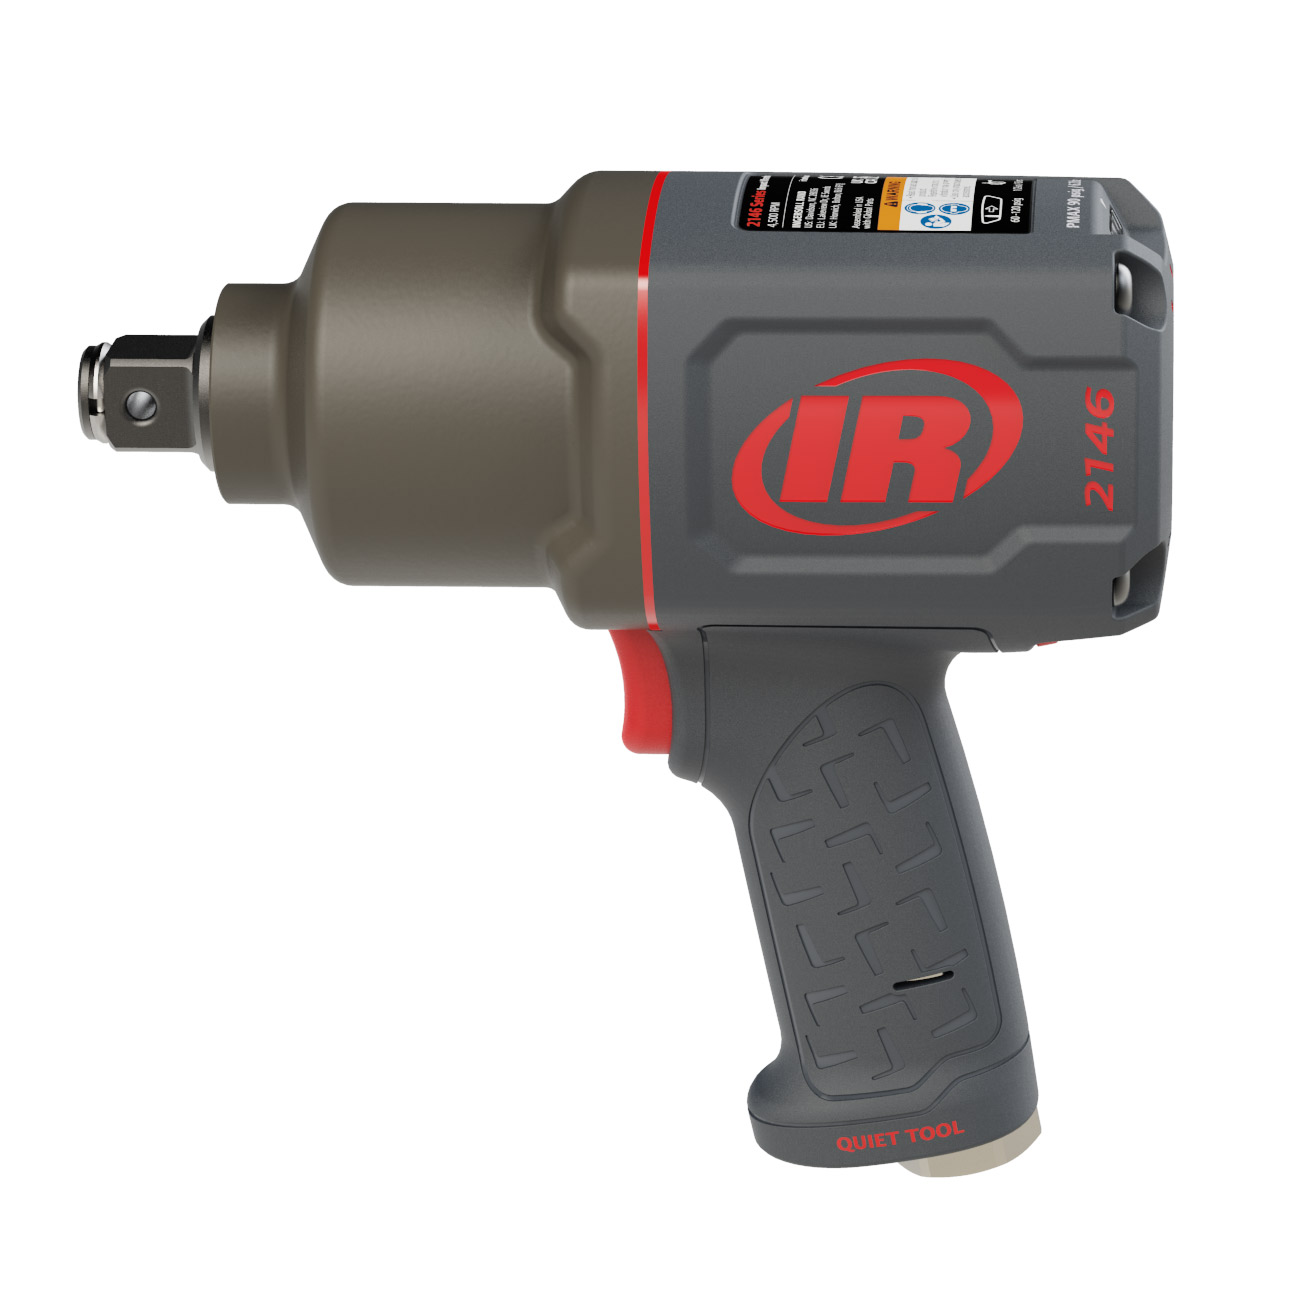 2146Q1MAX 3/4"" Air Impact Wrench - Side view